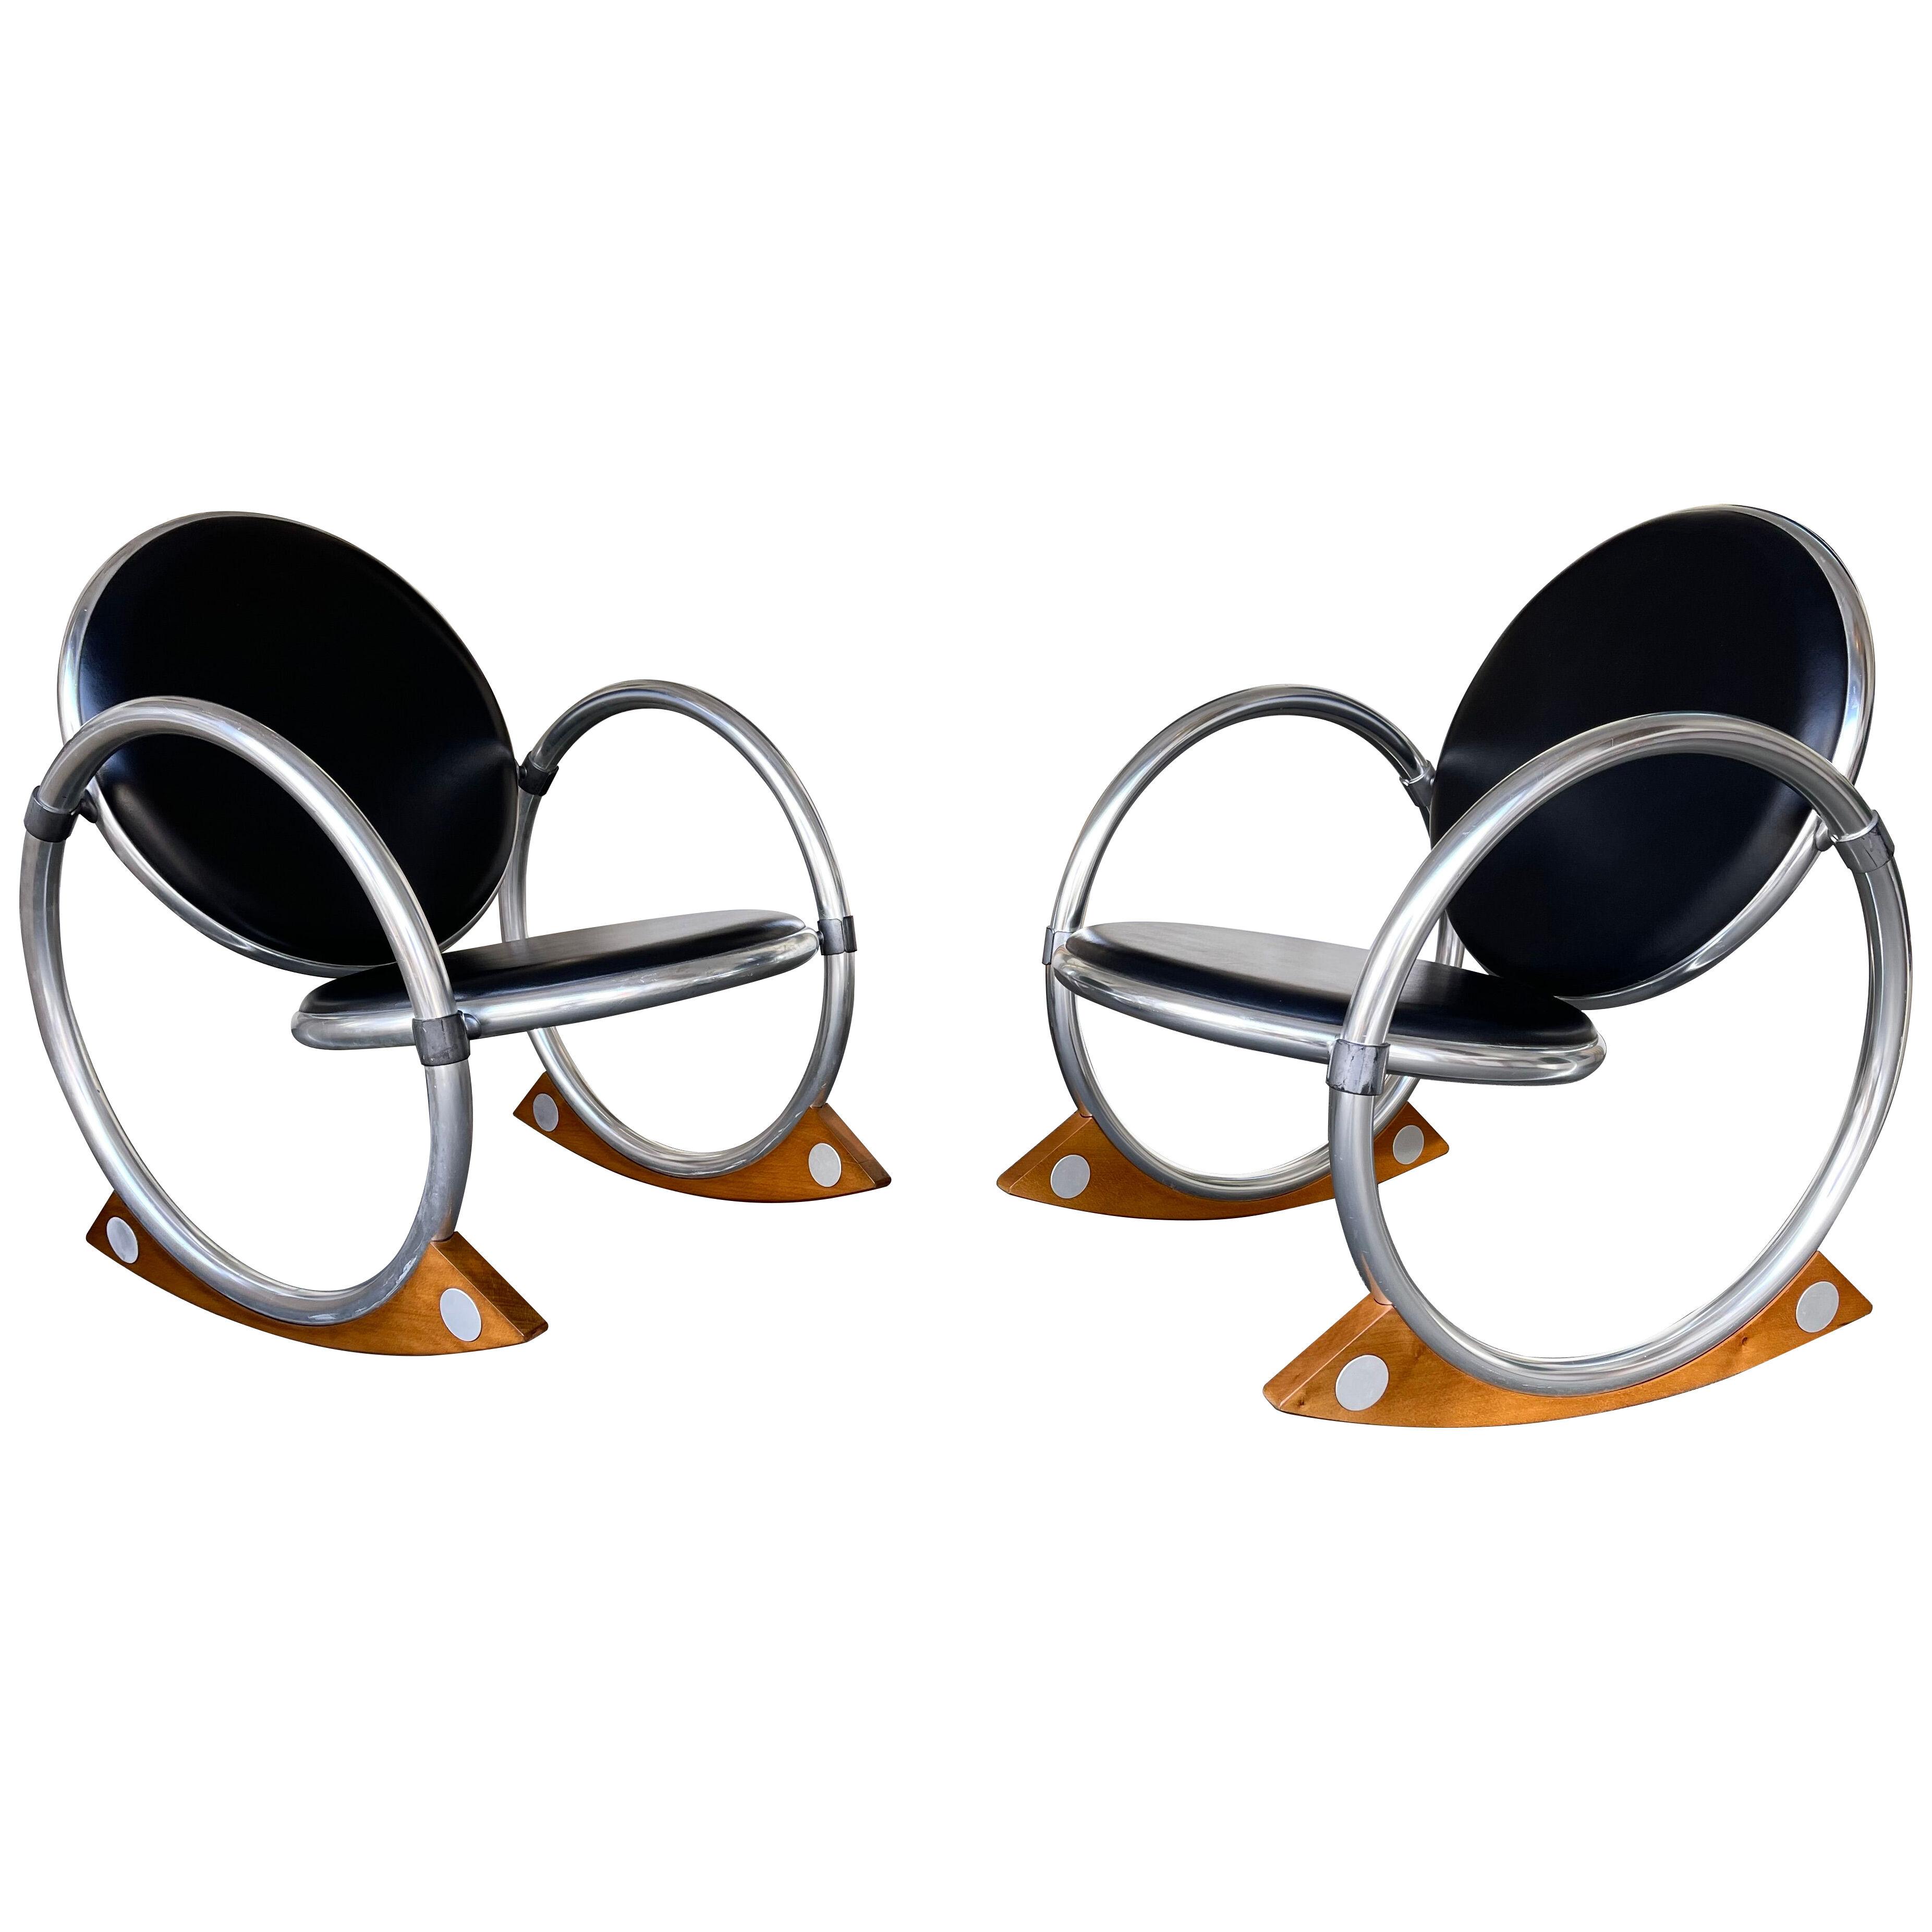 Pair of Rocking Chairs Dondolo by Verner Panton for Ycami. Italy 1990s